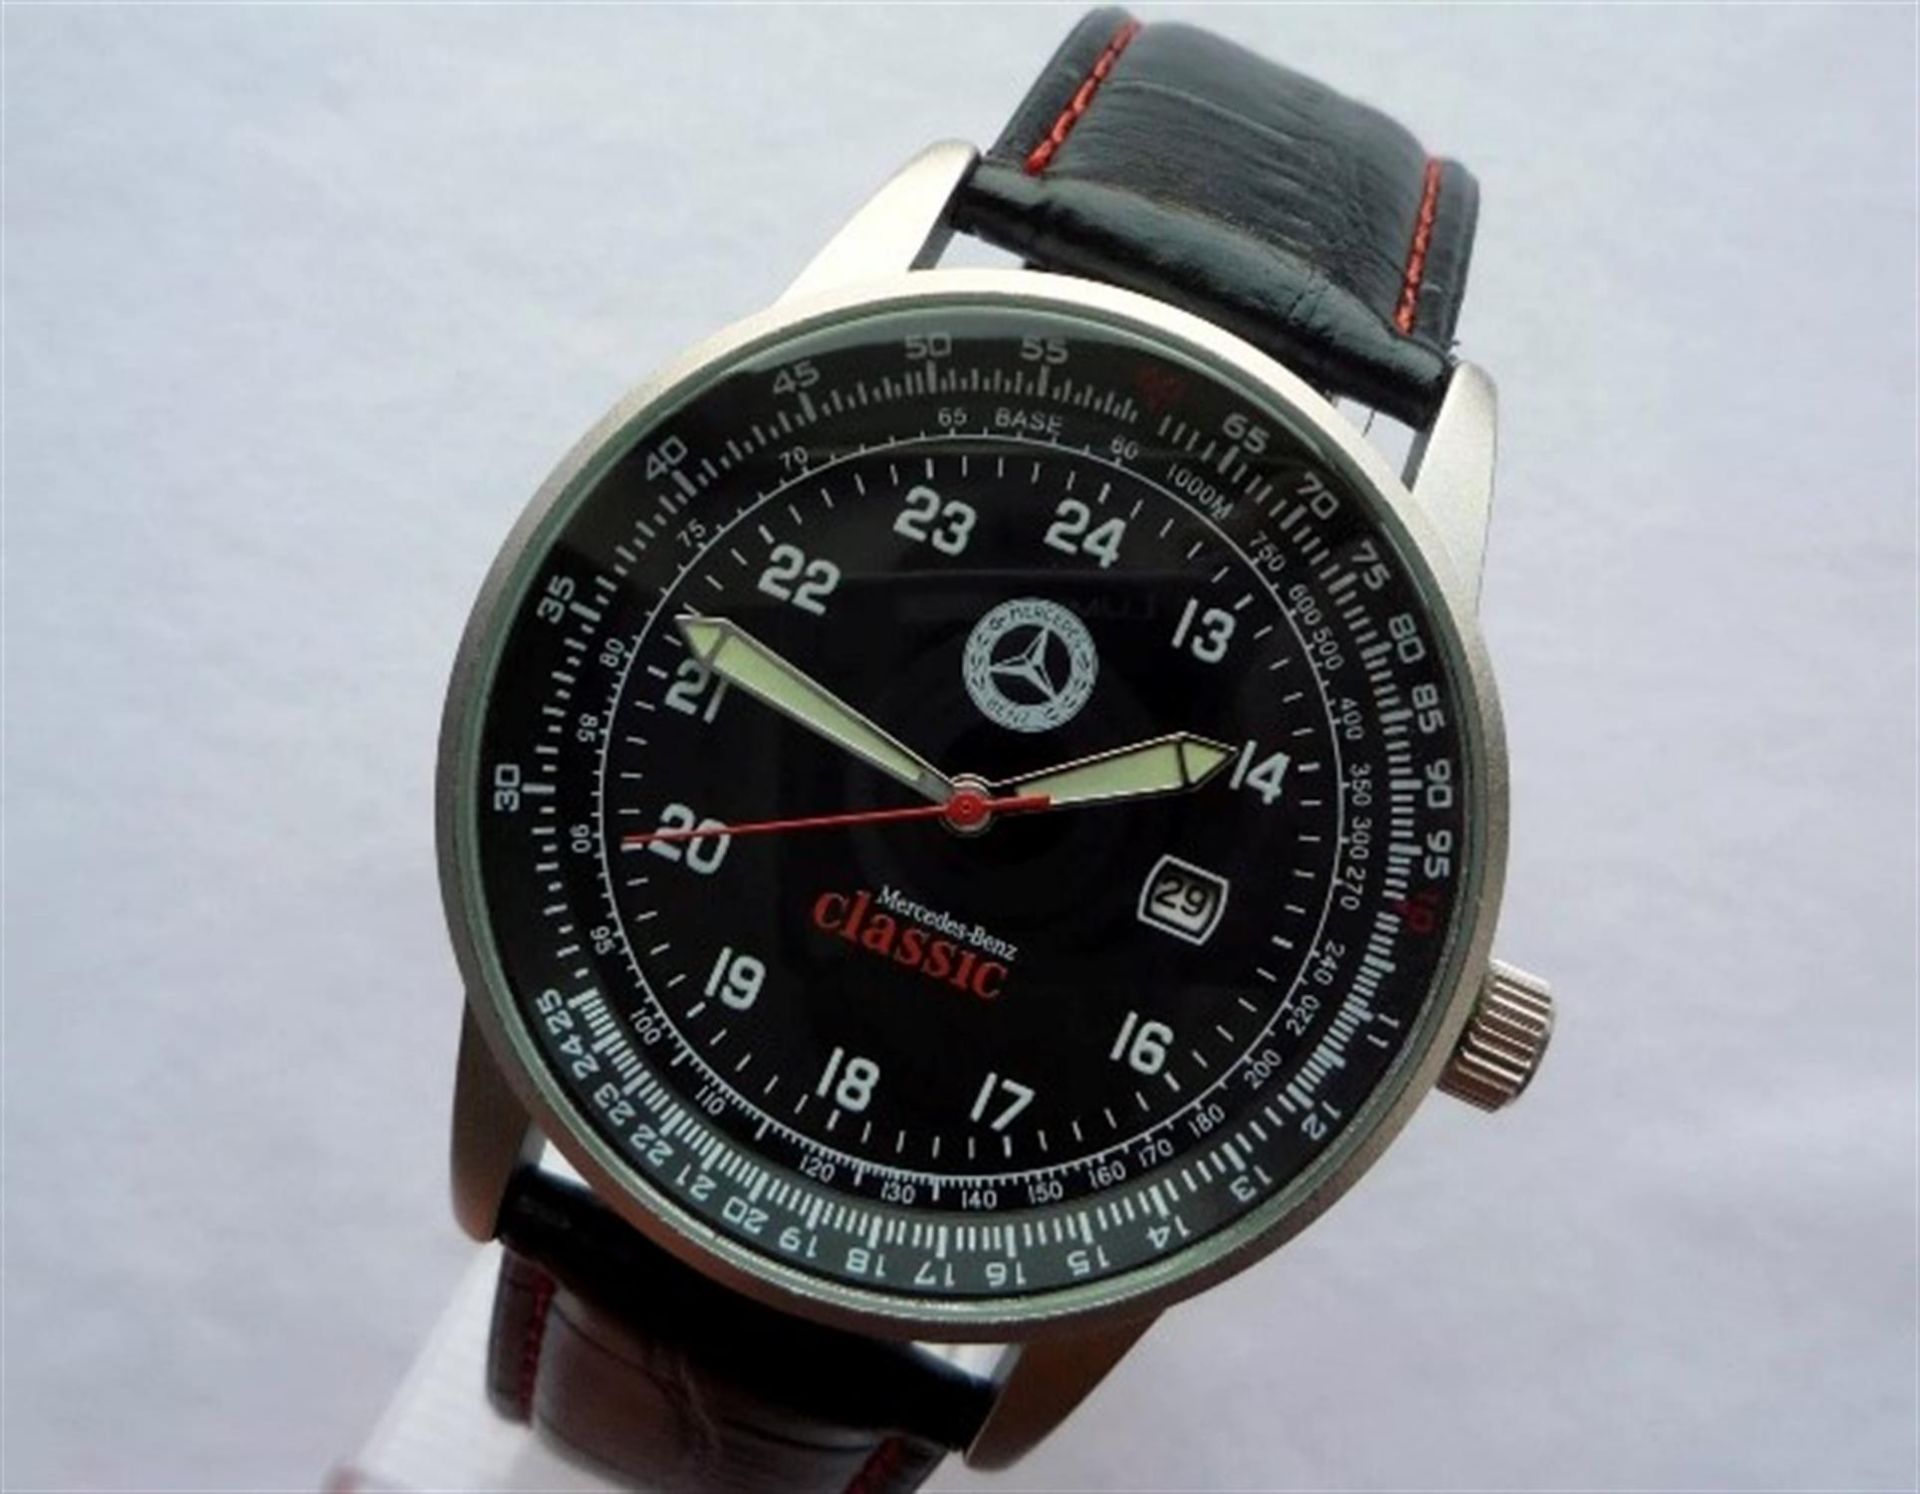 A Mercedes-Benz Classic Aviator New Old Stock Watch c.2015 - Image 7 of 10